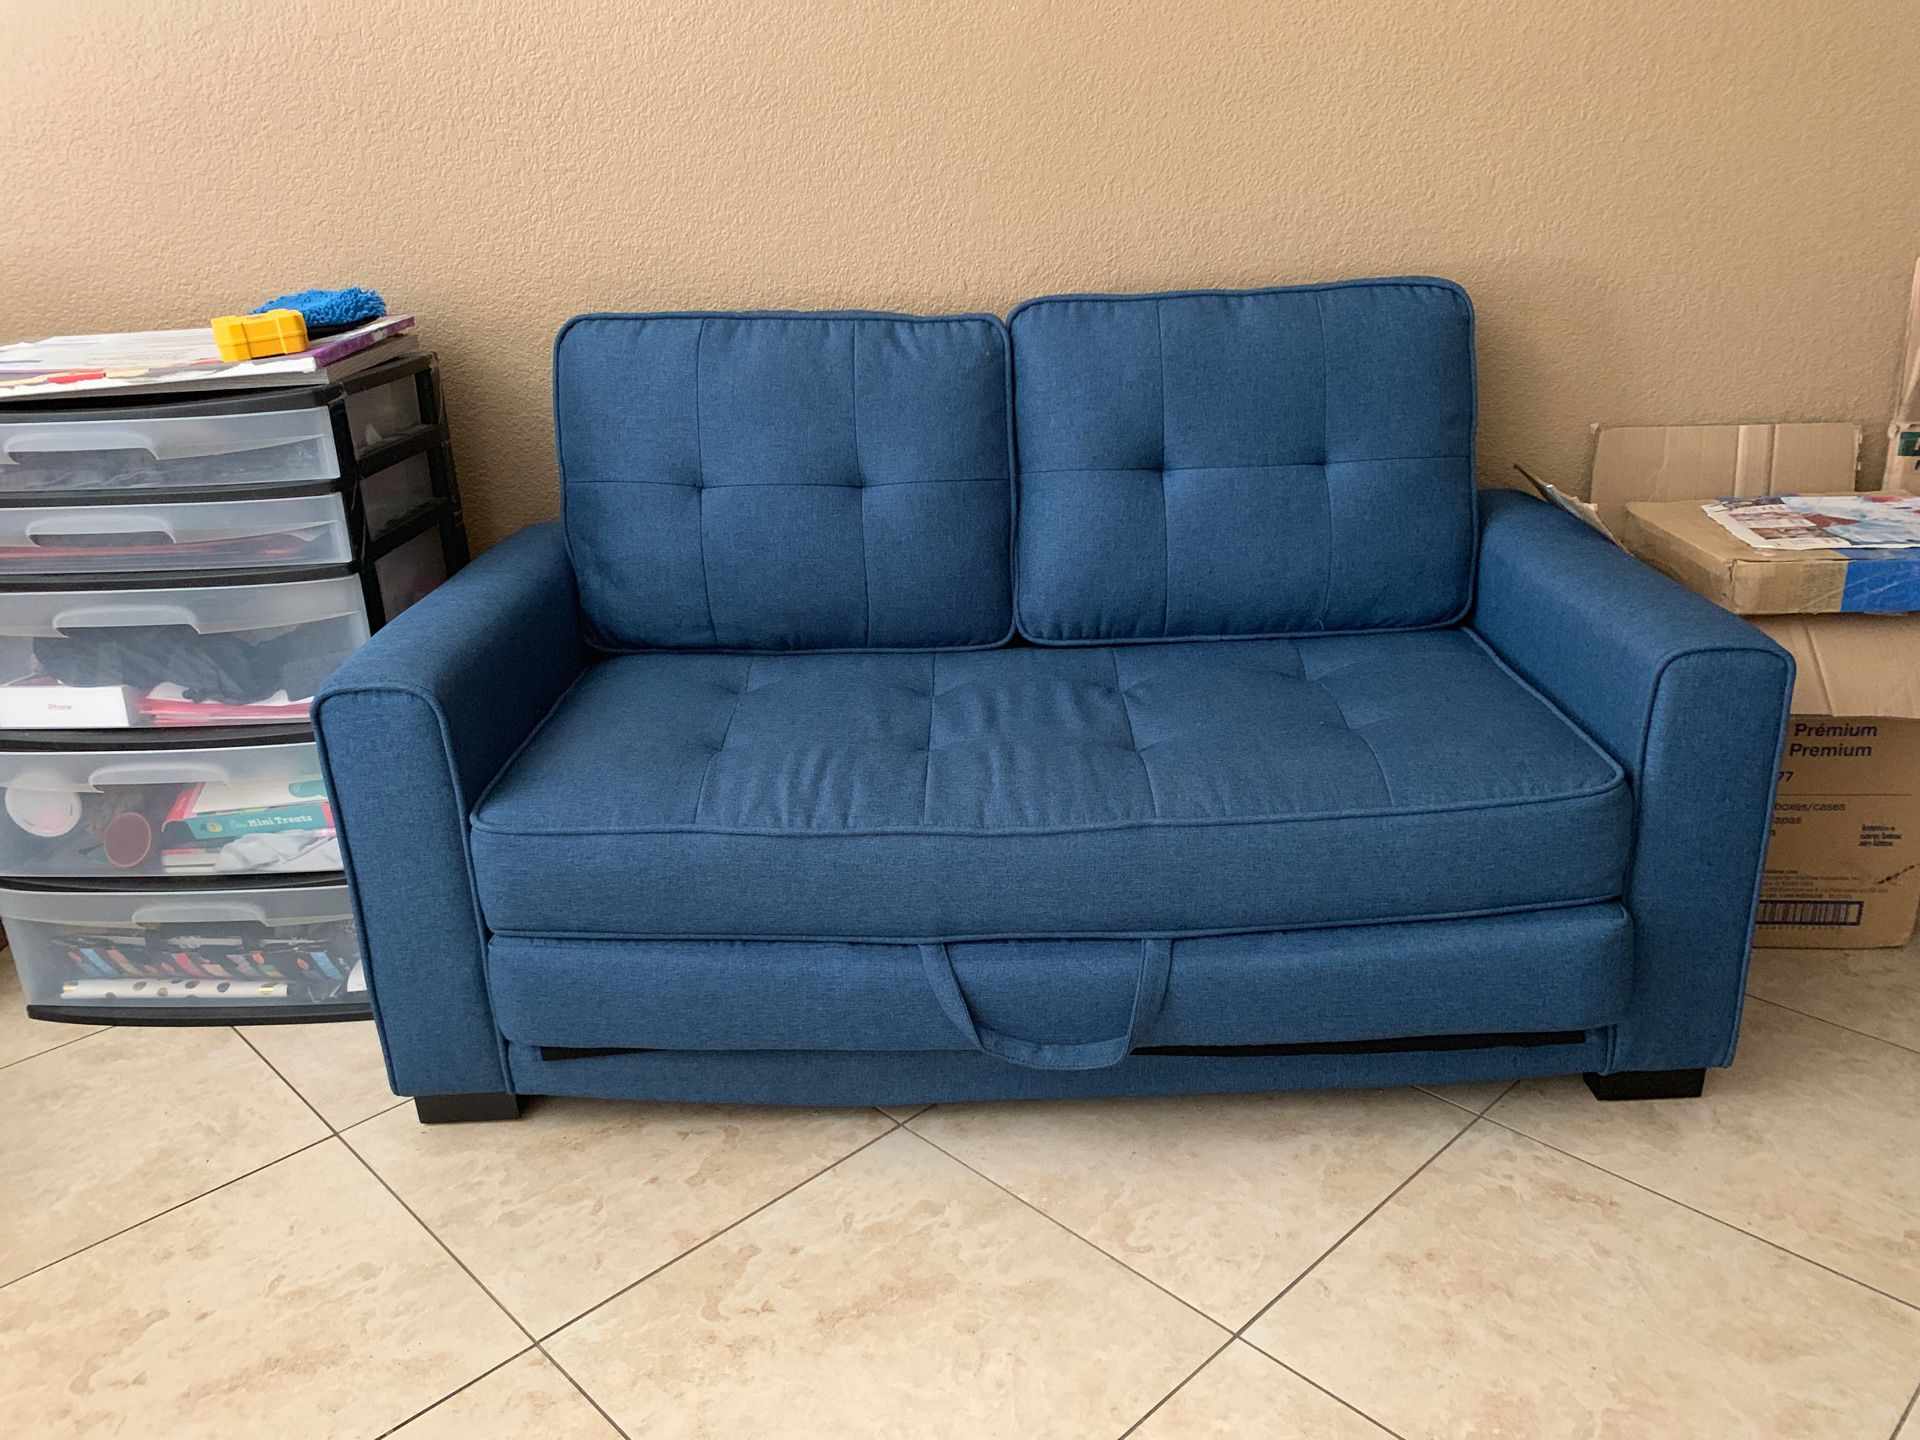 Small fold out couch